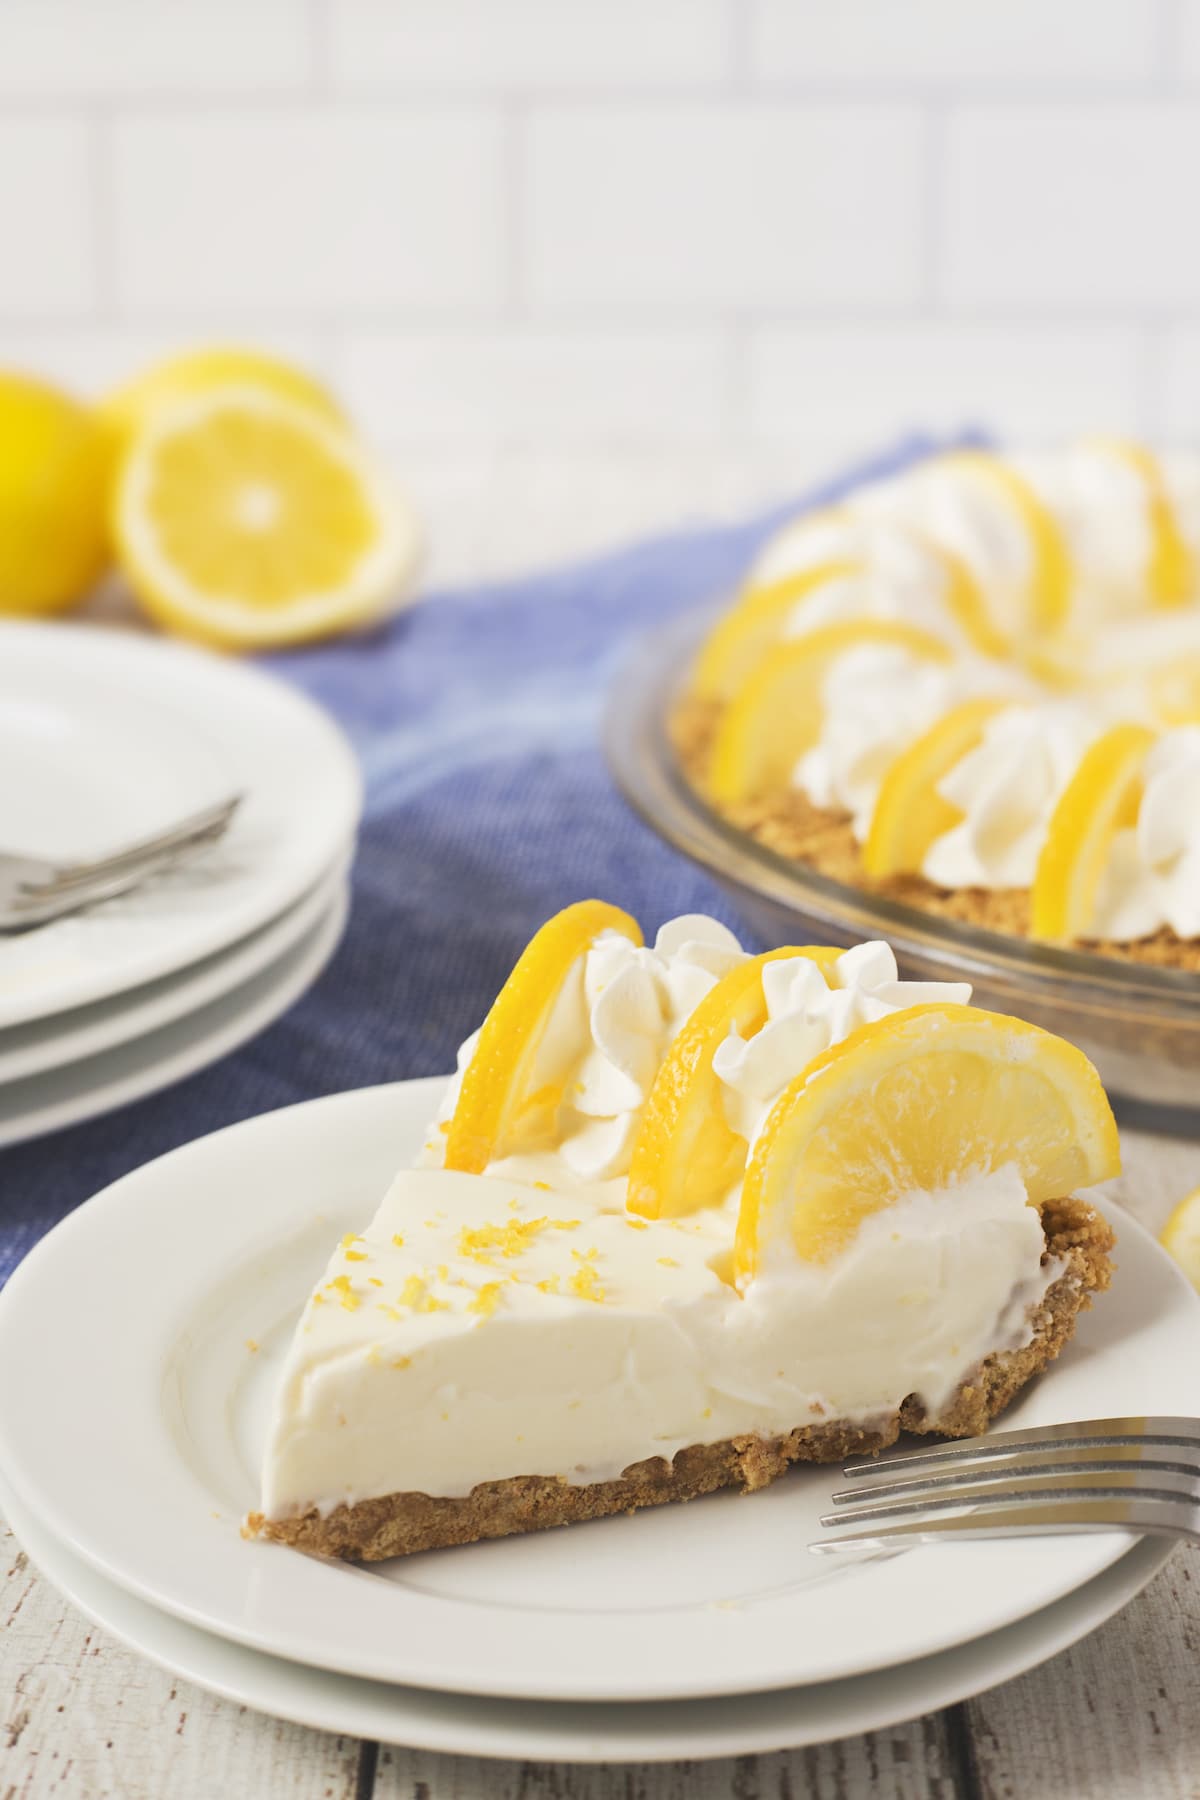 lemon pie with lemon slices and whipped cream on top.